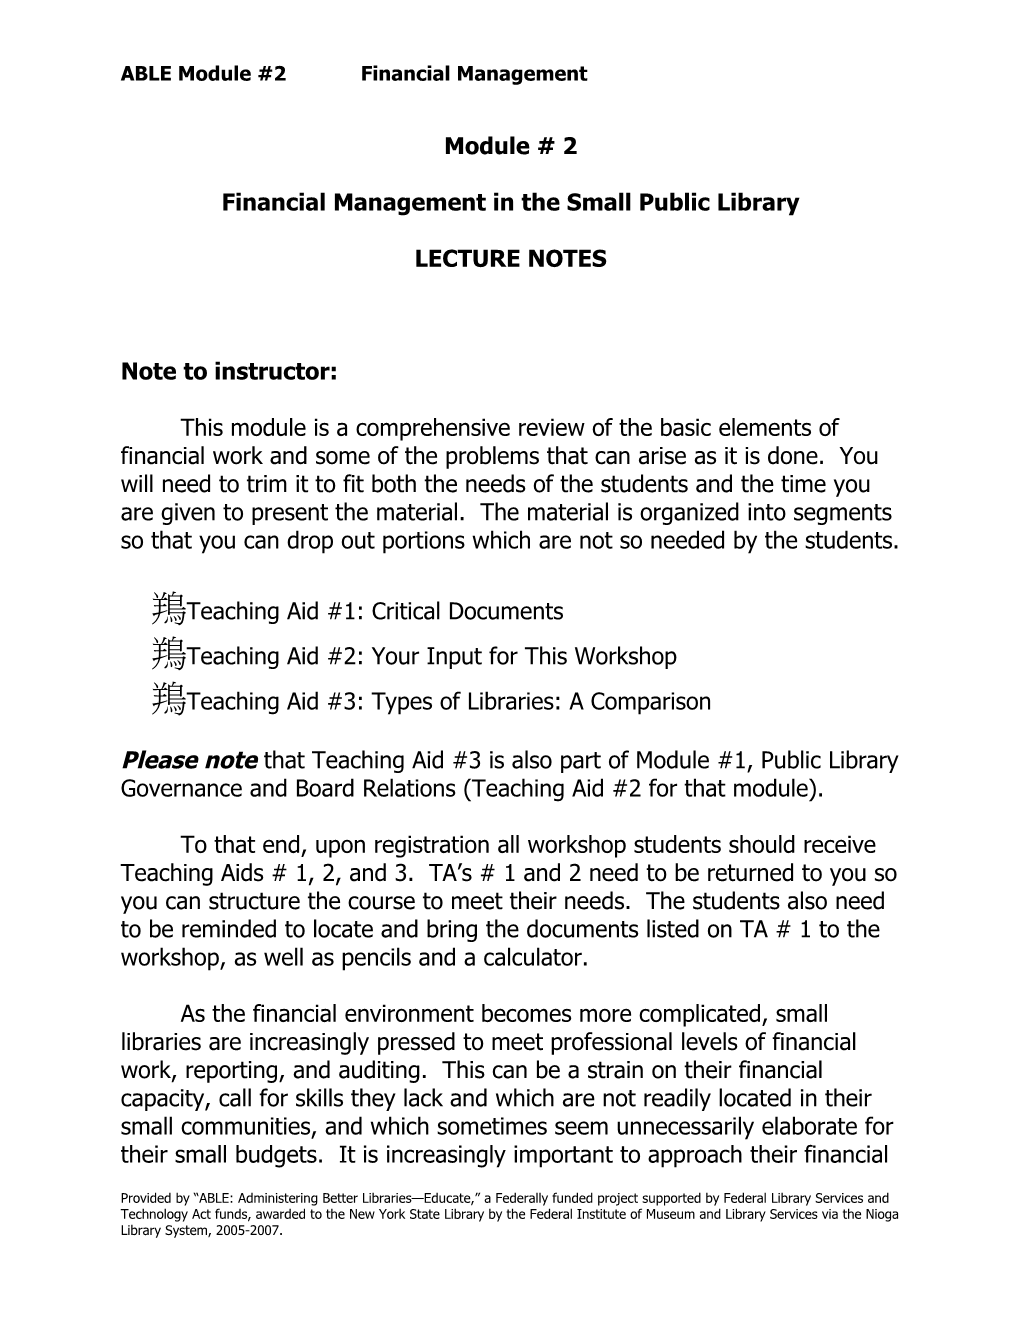 Financial Management in the Small Public Library